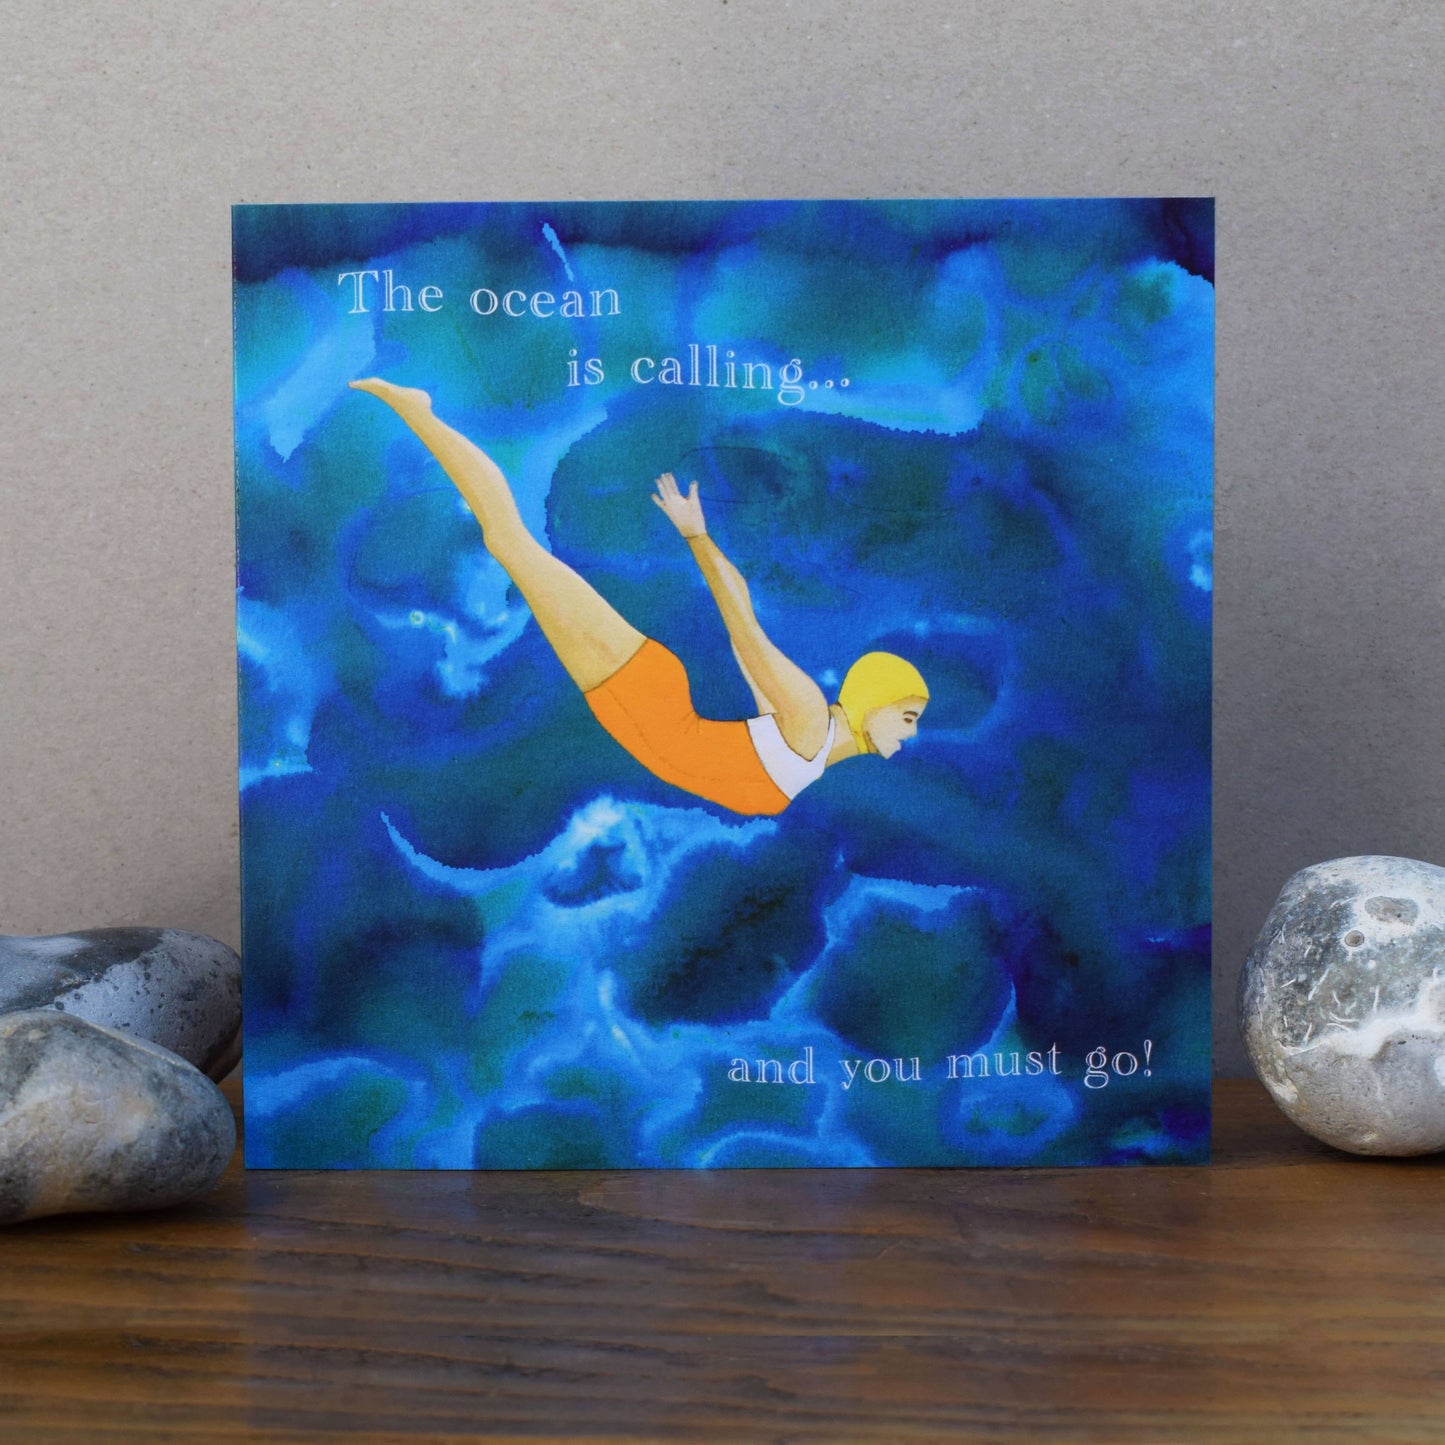 'The Ocean is Calling' (swimming/diving card)